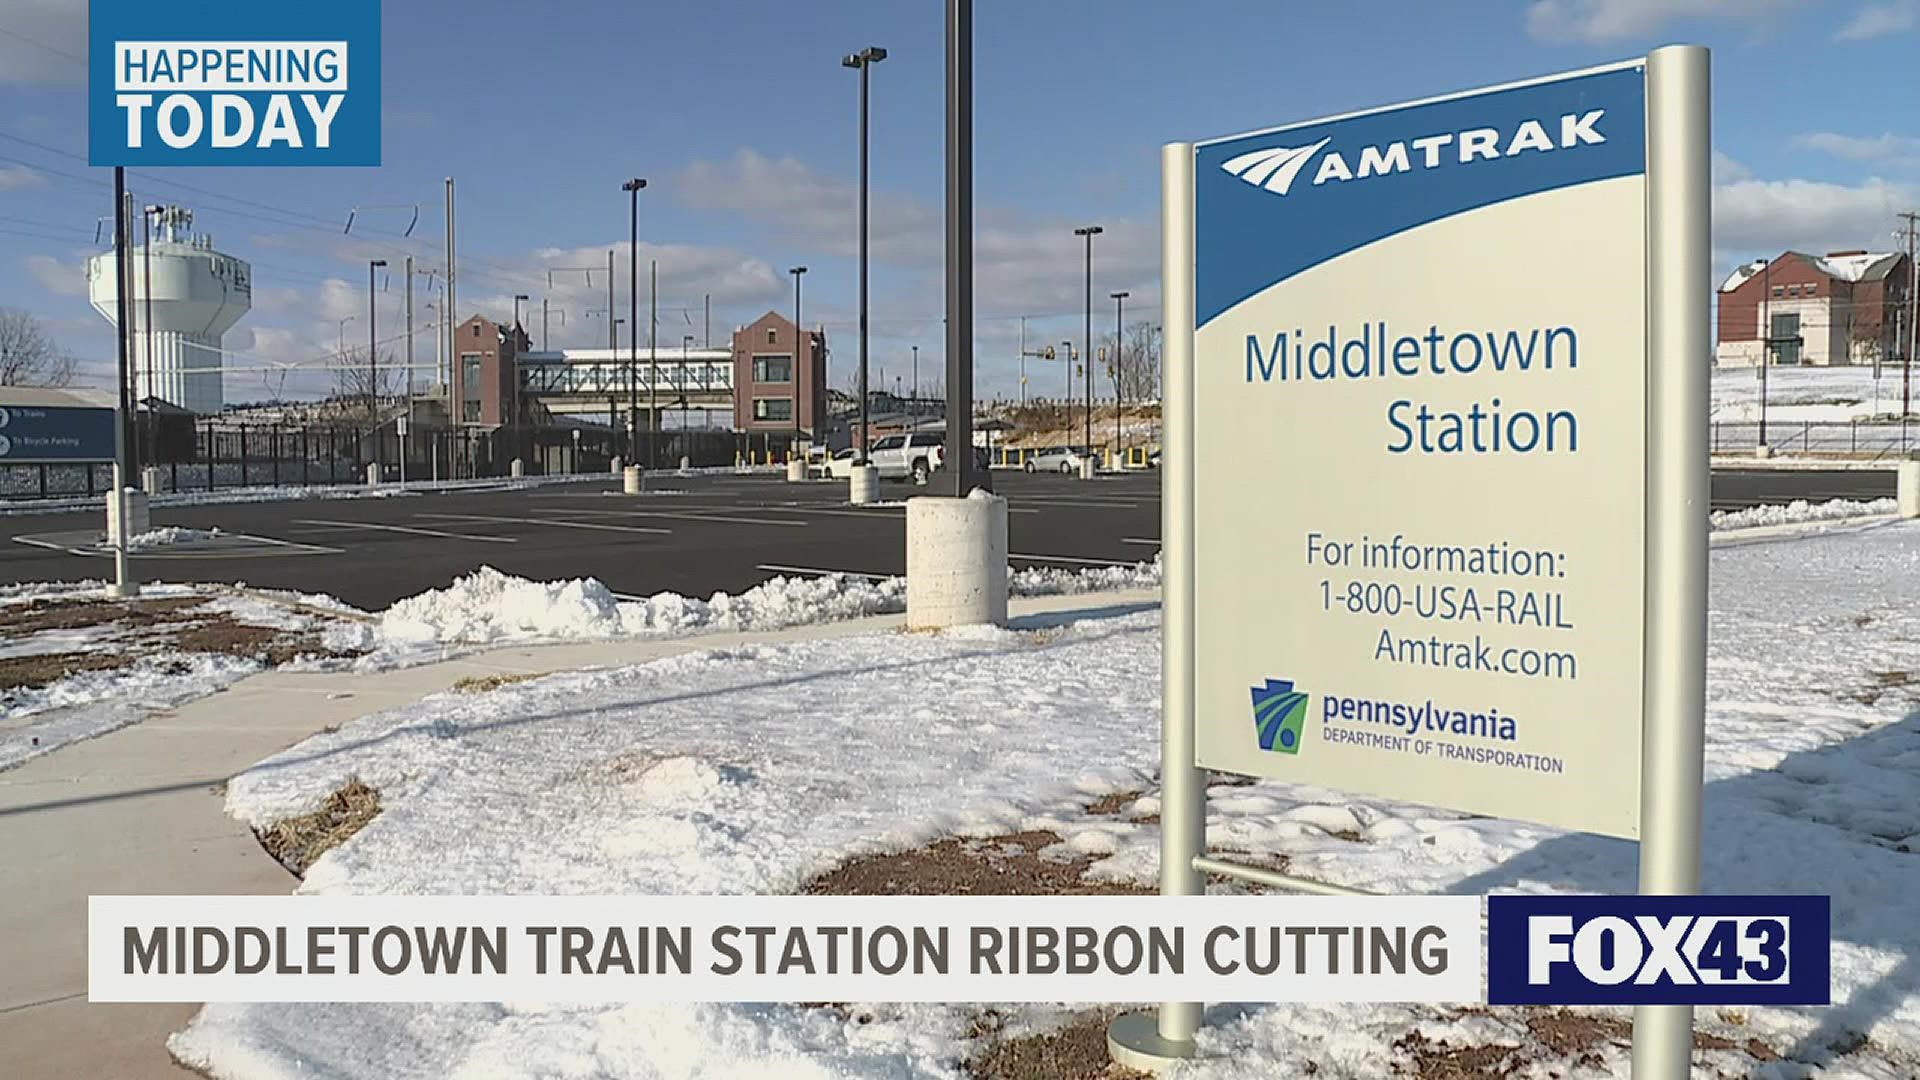 The station opened to the public on Jan. 10. but the ribbon cutting ceremony is set for Tuesday morning.